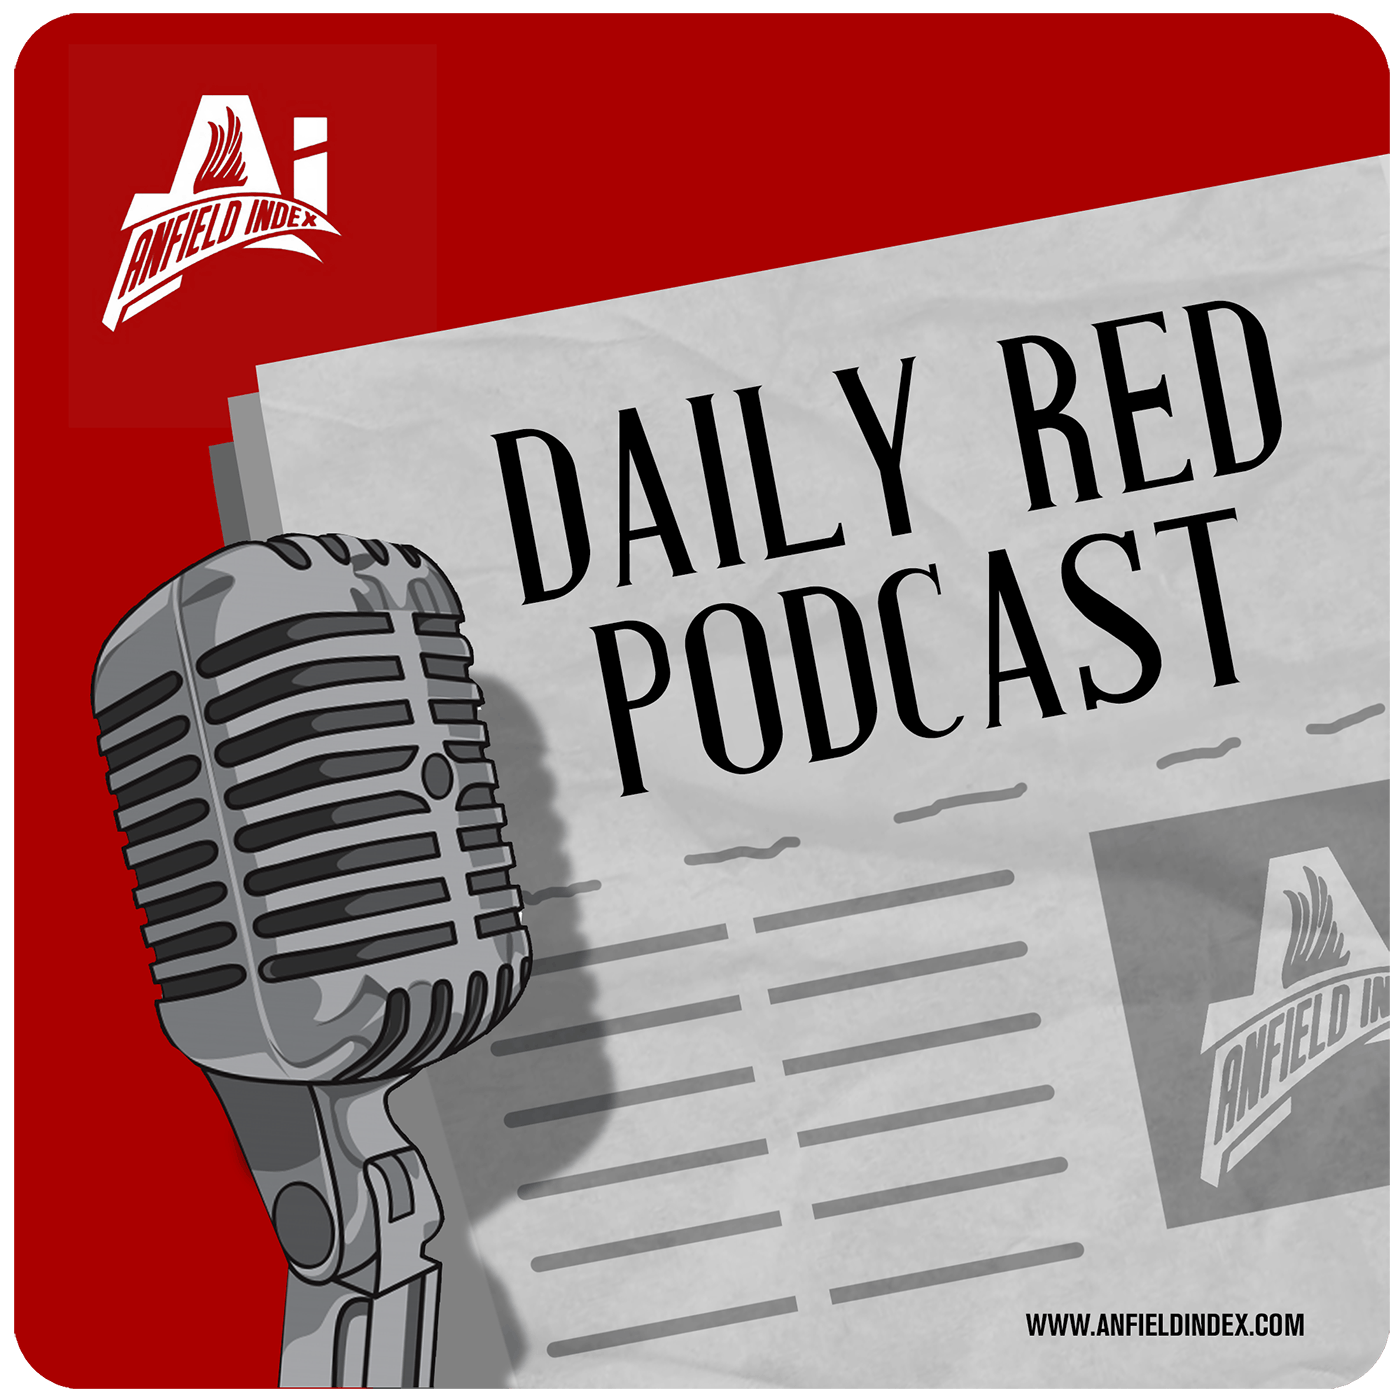 A Goodbye To Matip & Thiago: Daily Red Podcast